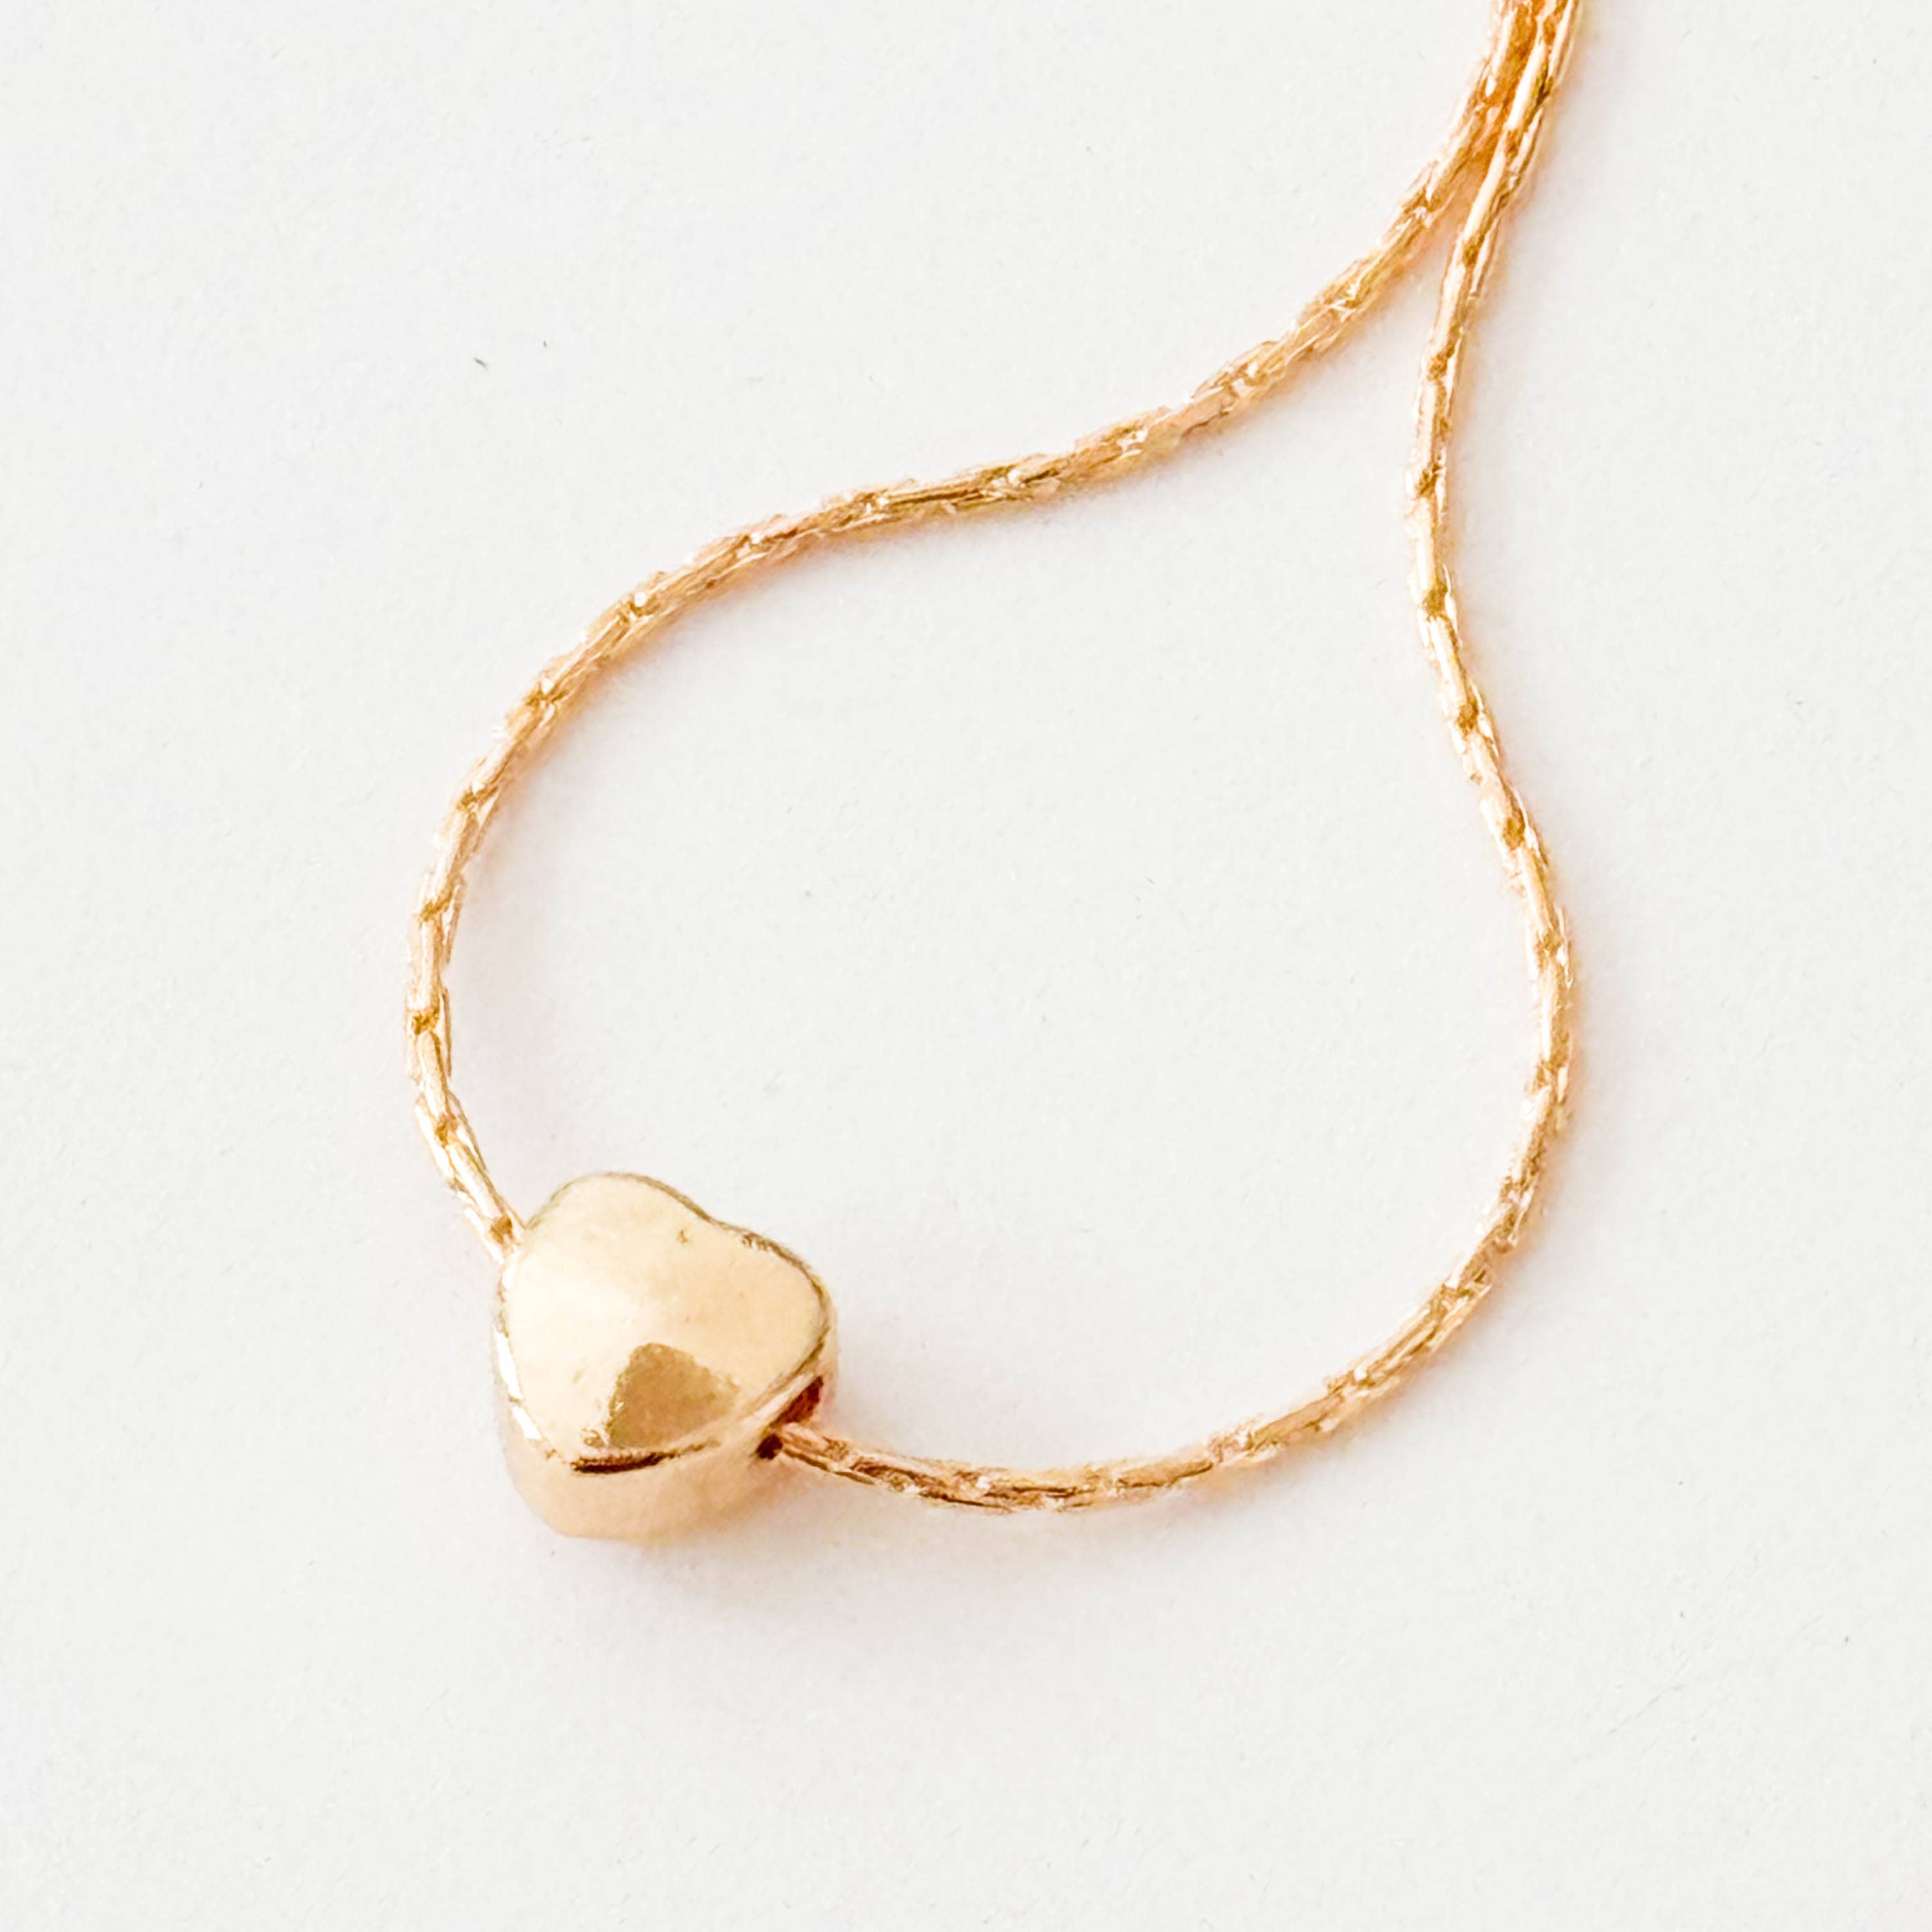 Nest Pretty Things - Tiny Gold  Filled Heart Charm Necklace